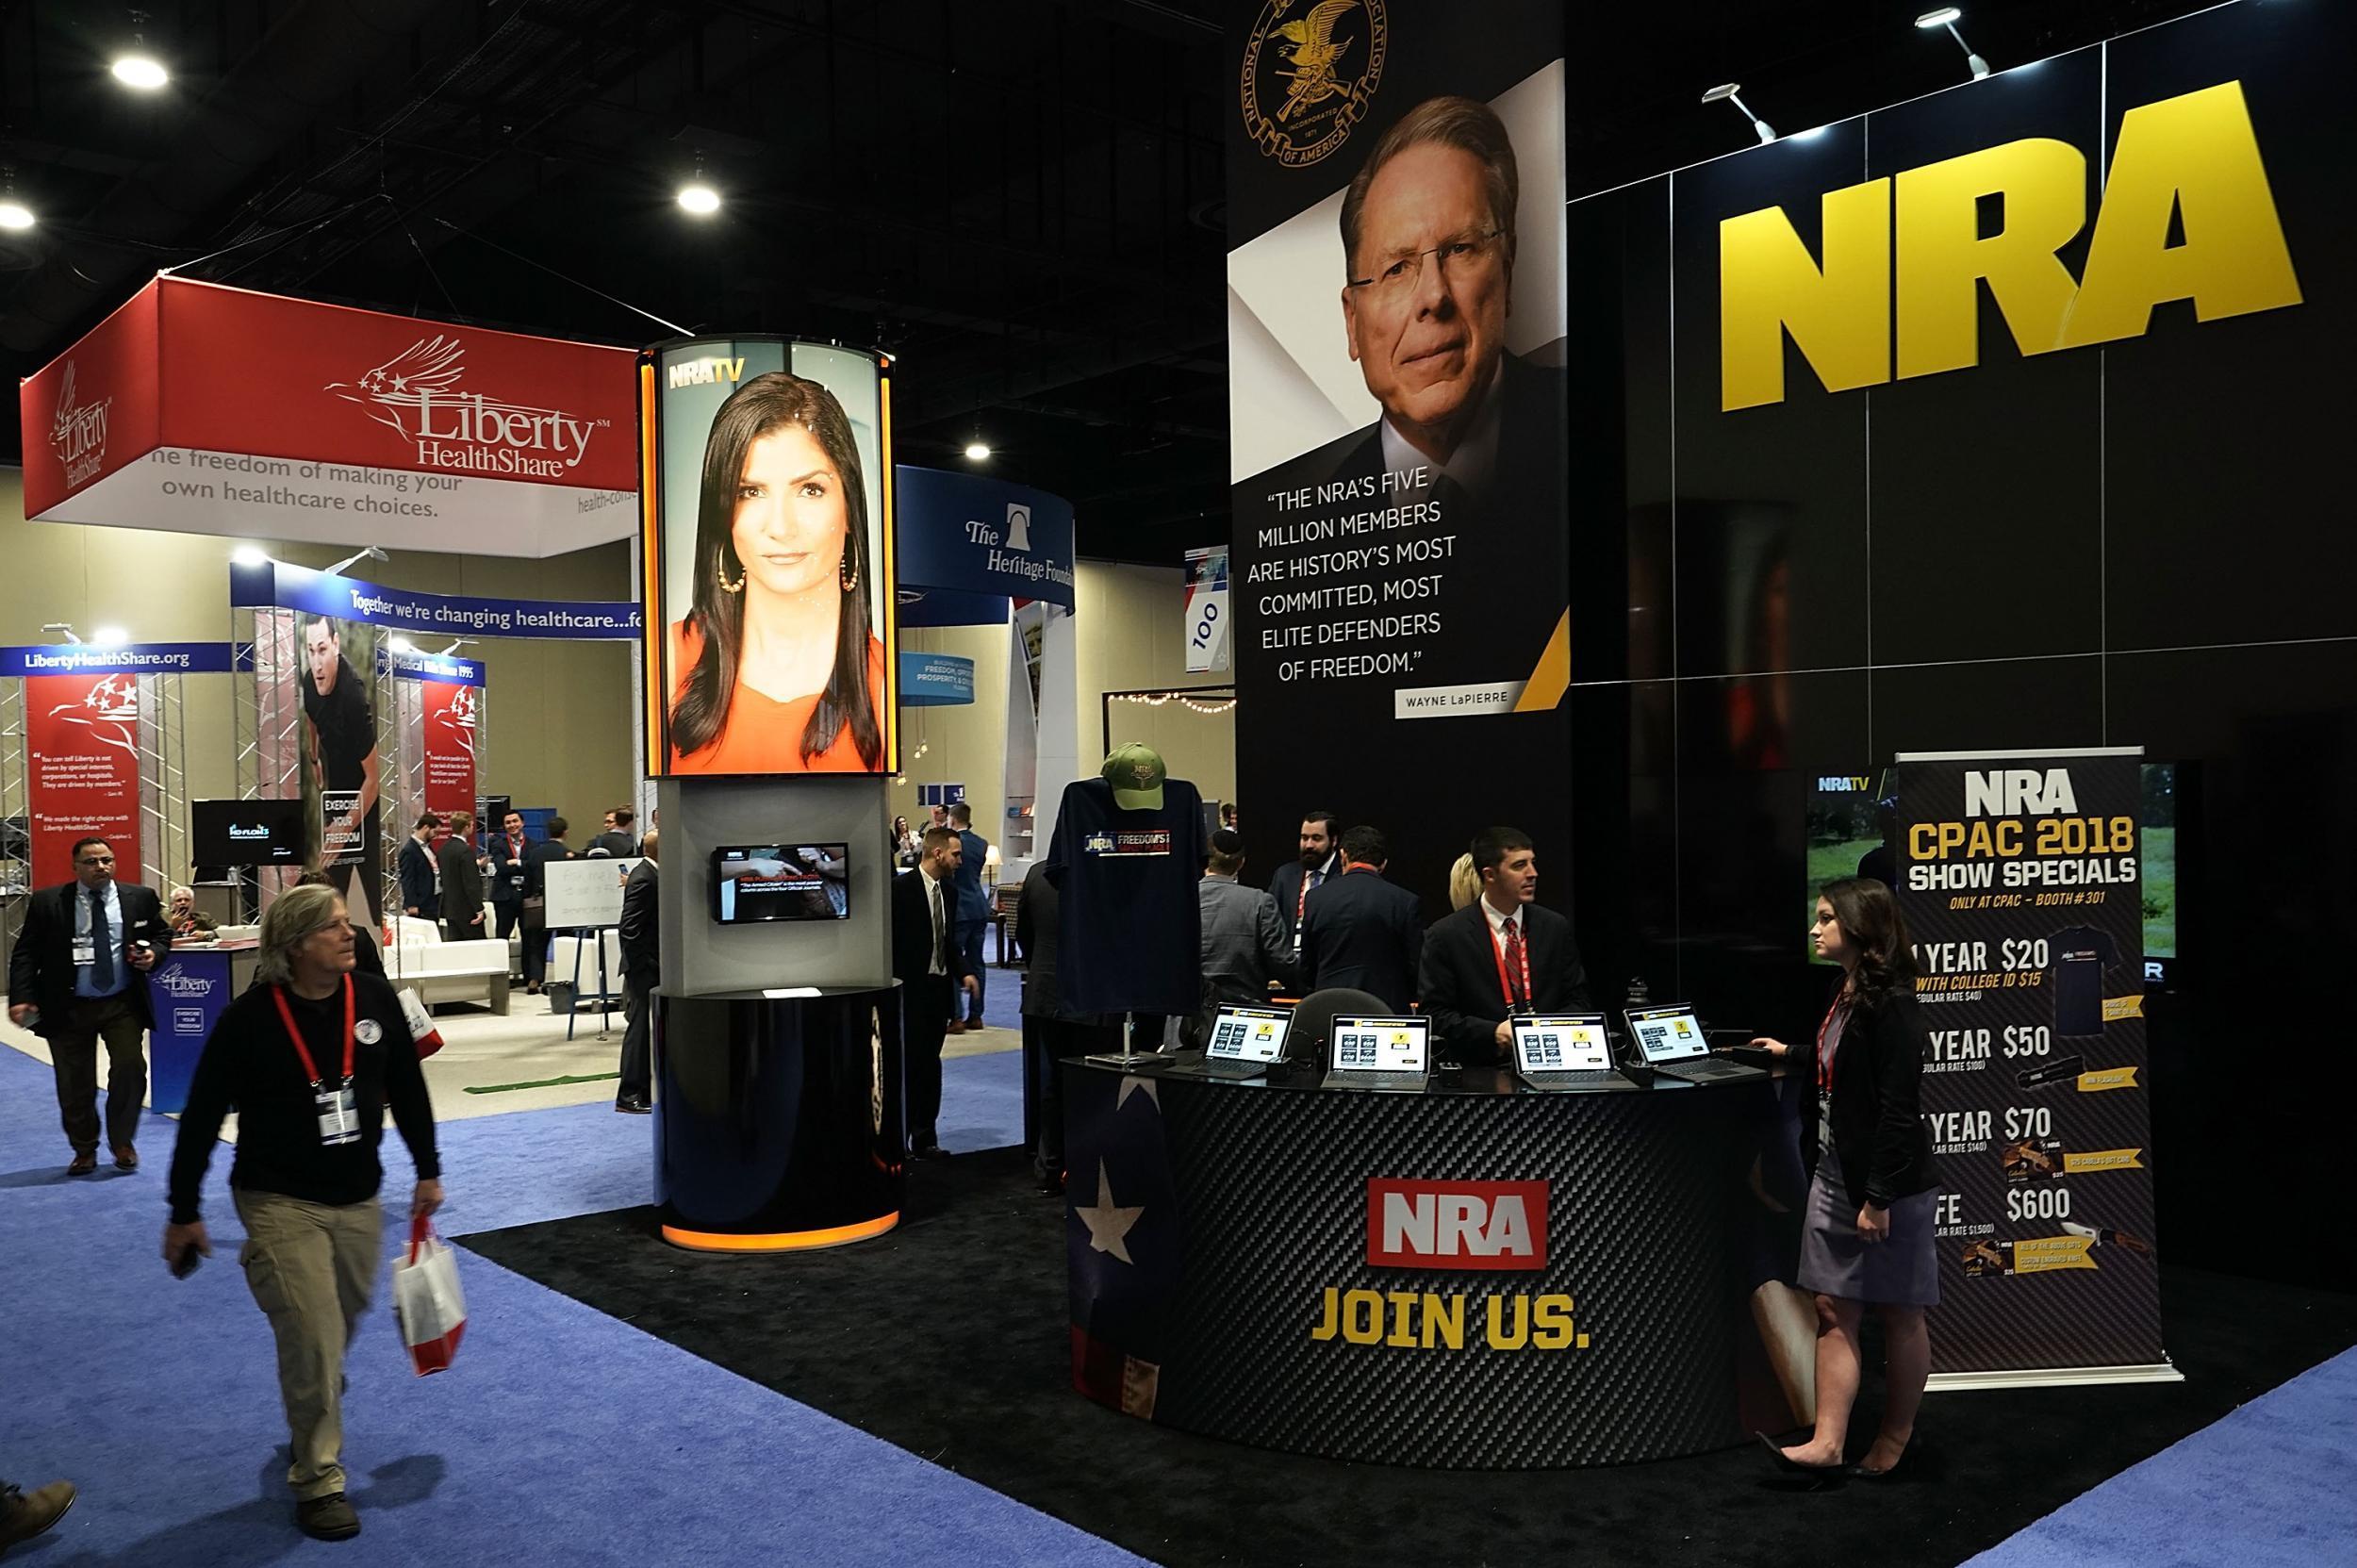 The booth of National Rifle Association